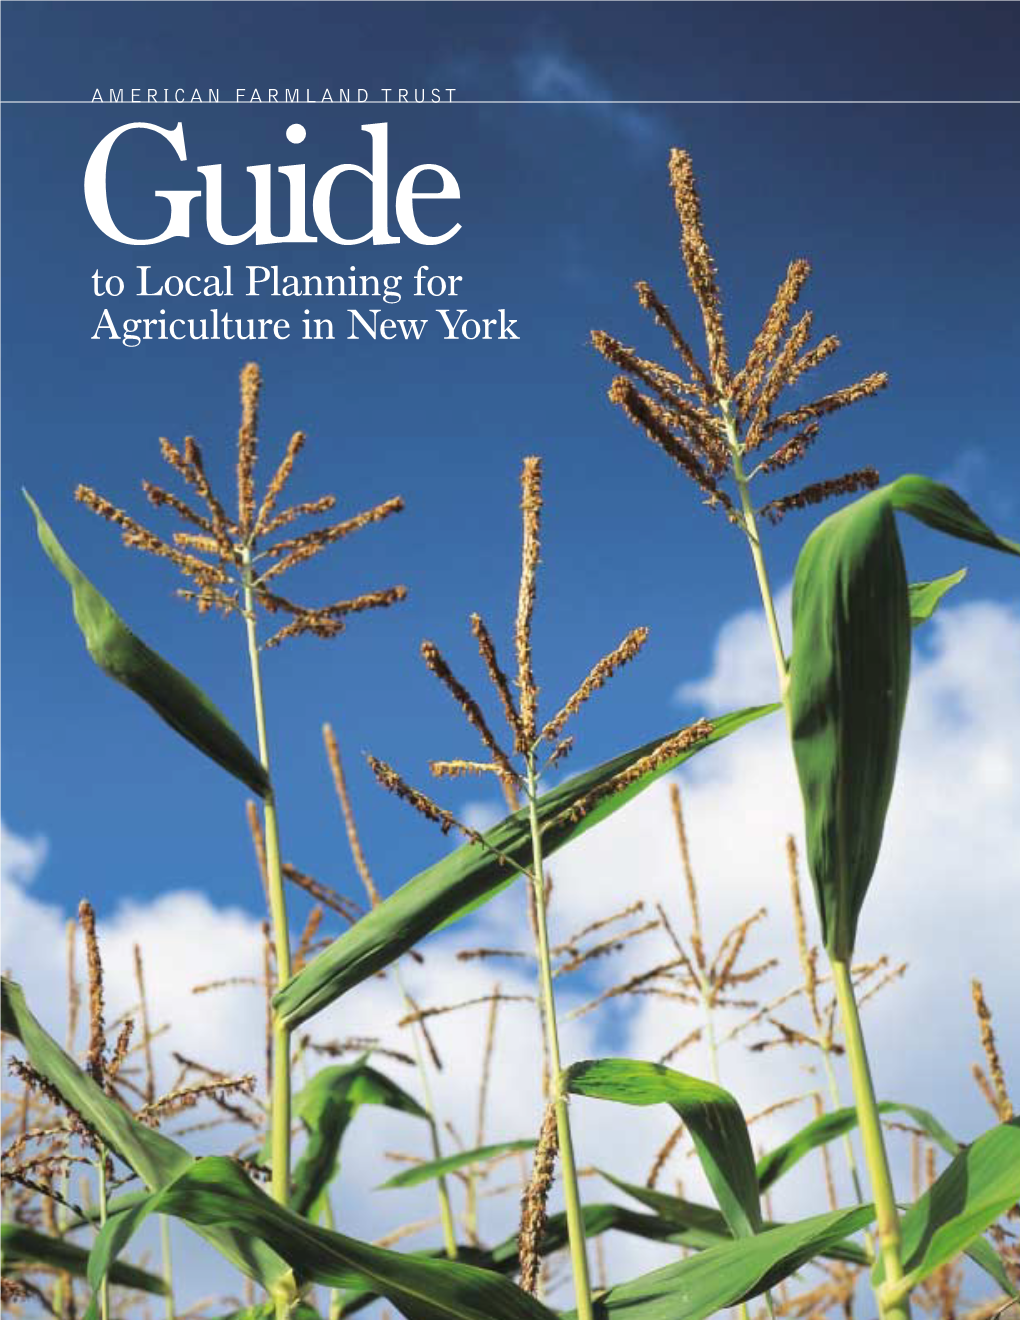 American Farmland Trust's Guide to Local Planning for Agriculture in New York